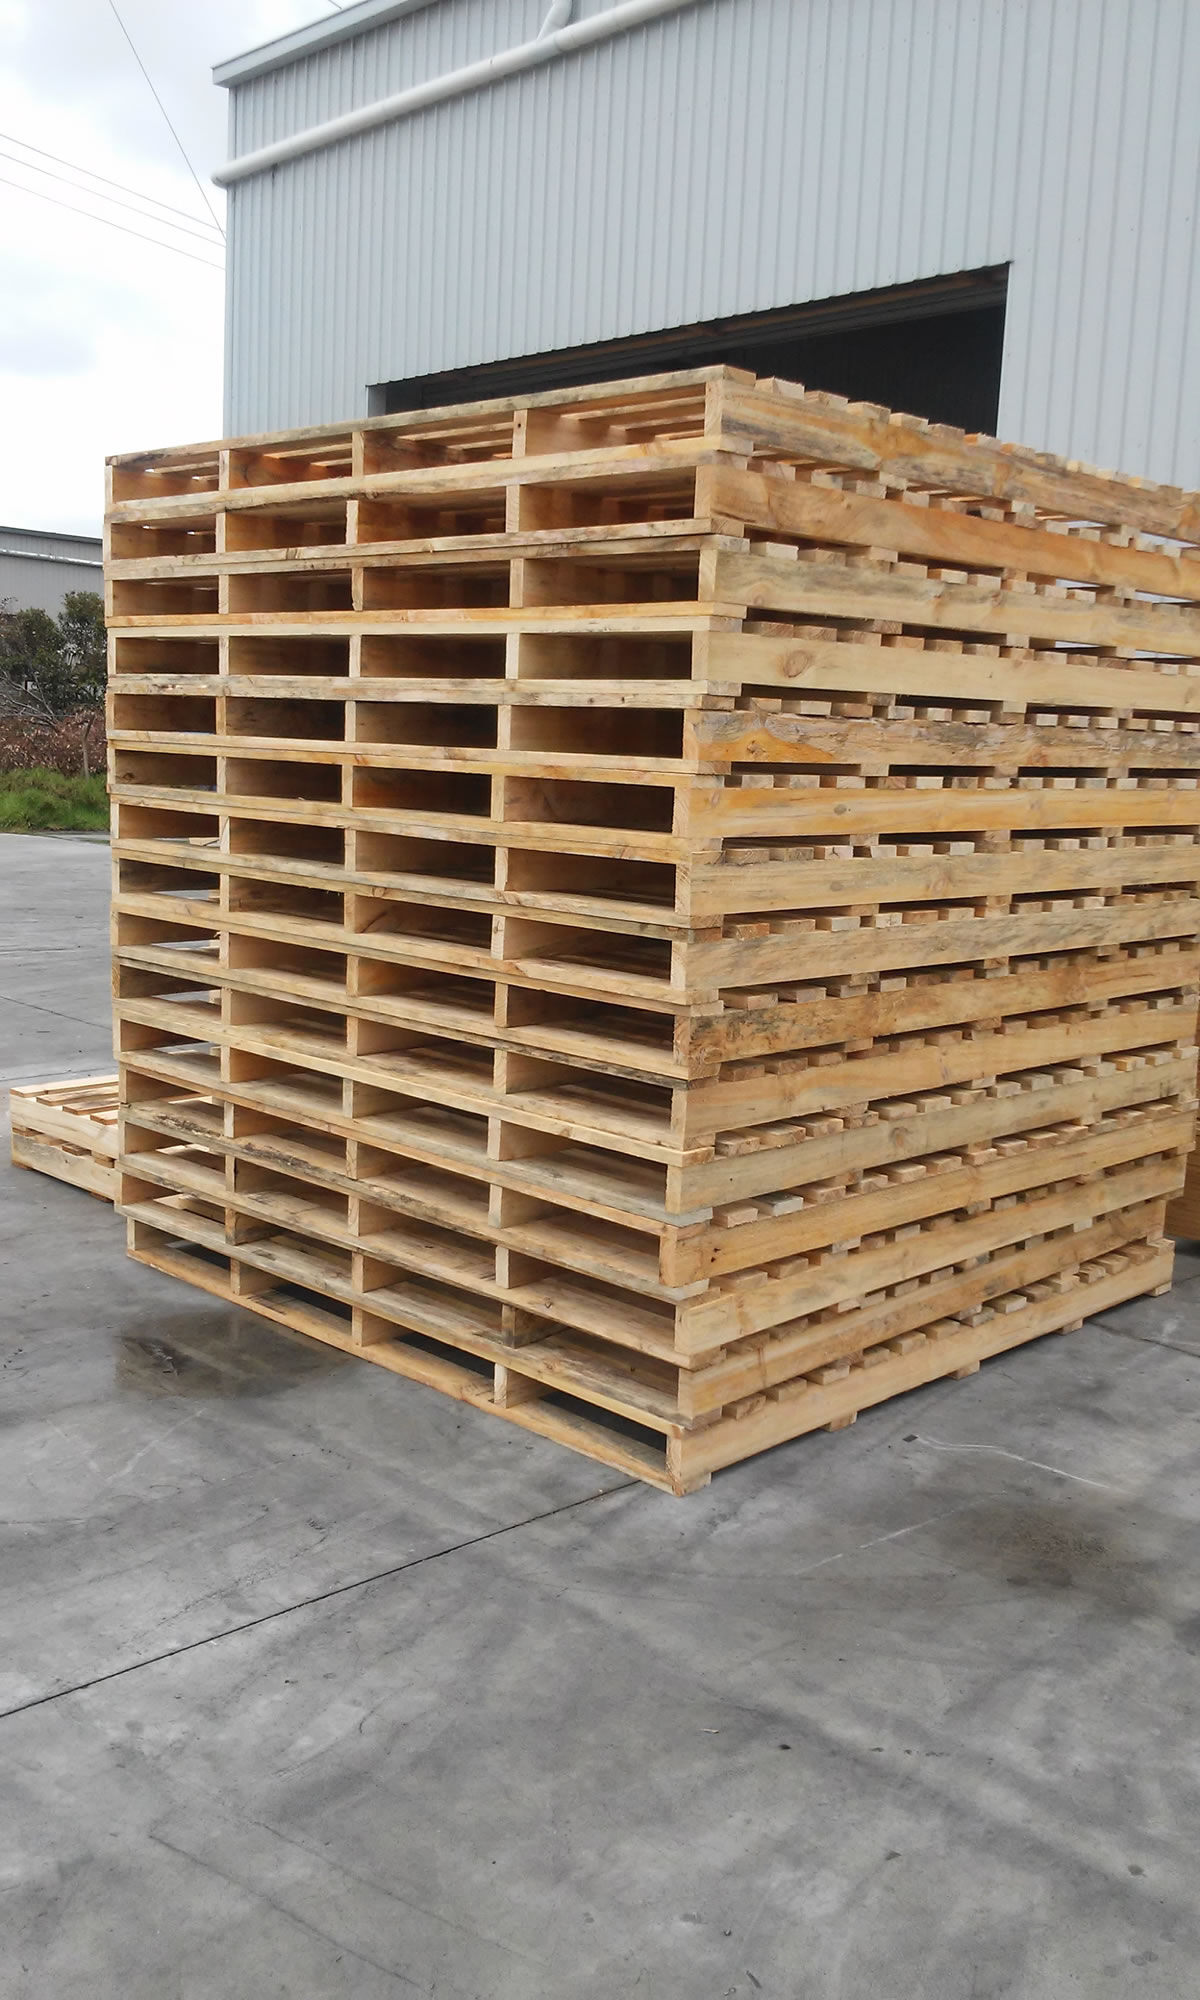 Timber pallets